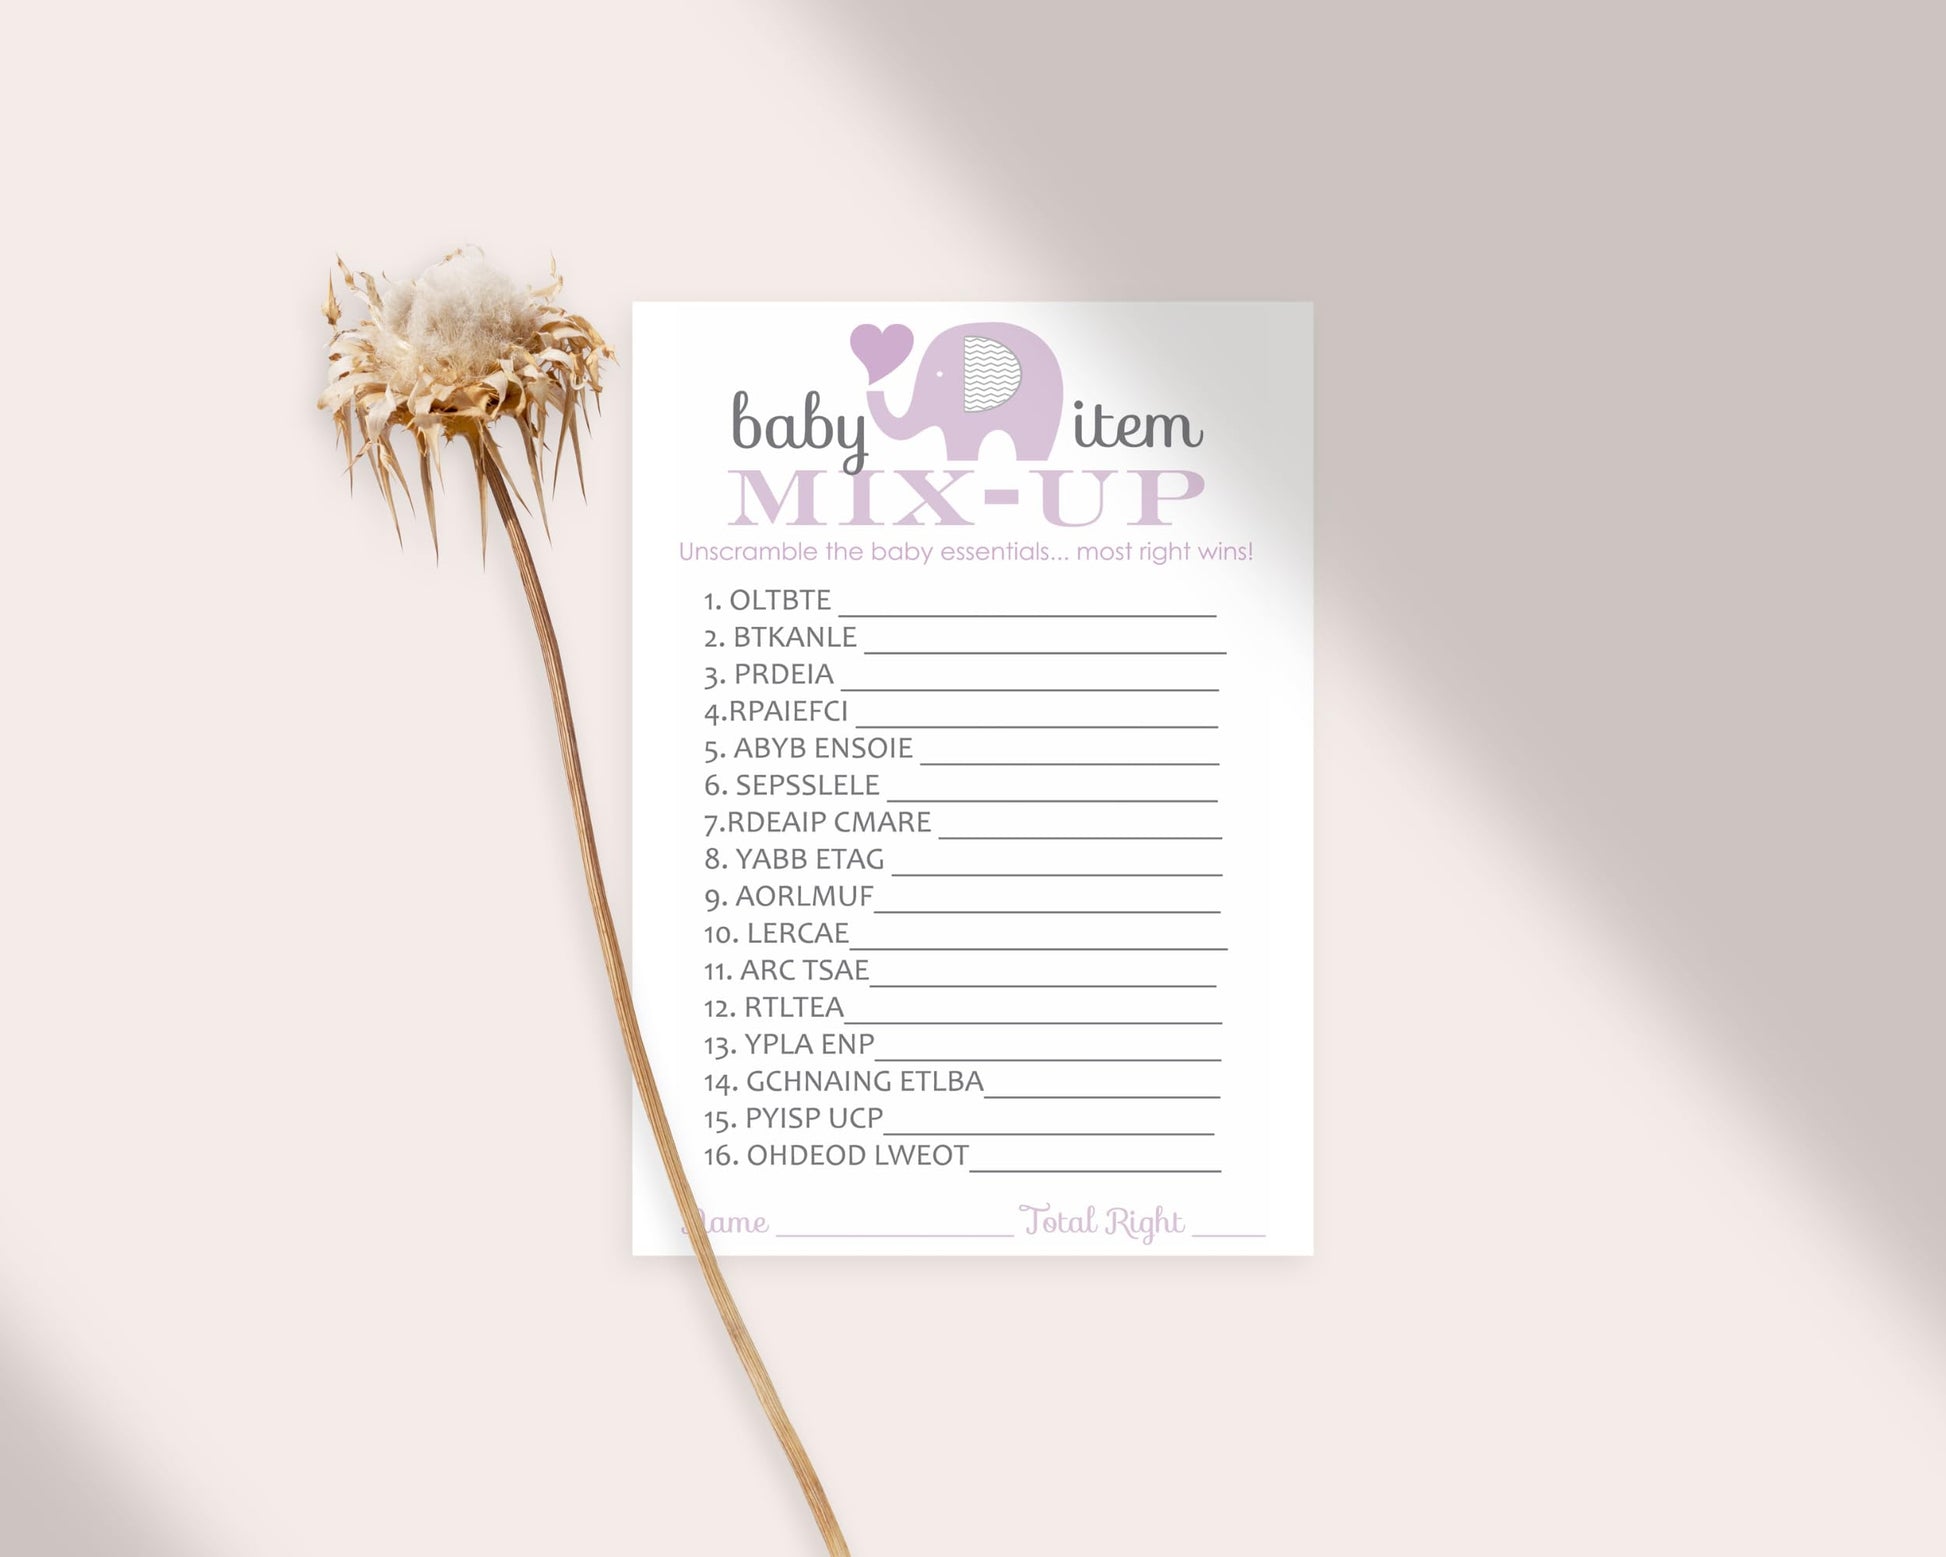 Guests - Girls Baby Shower Games - Princess Jungle Animal Themed - Printed 4x6 Size SetPaper Clever Party